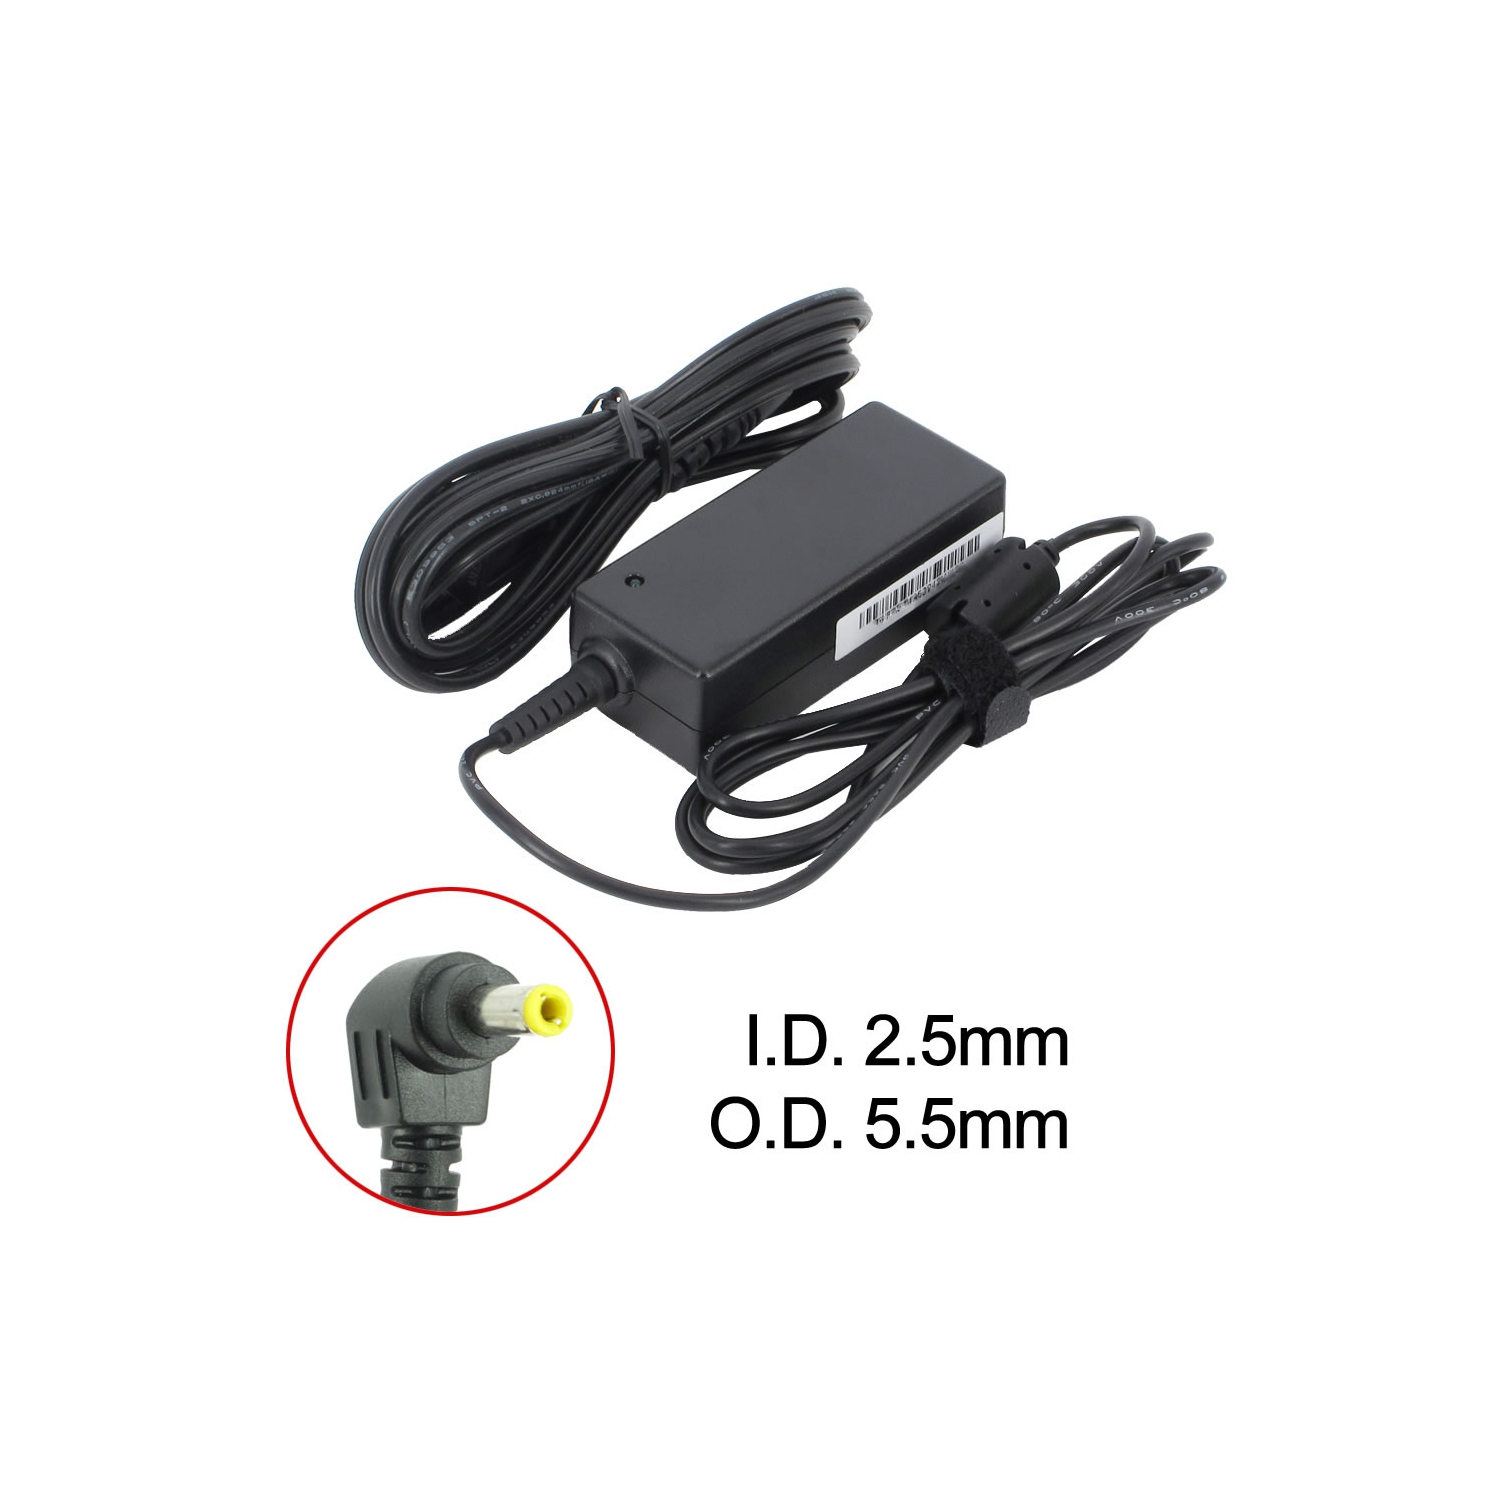 BattDepot: New Laptop AC Adapter for Lenovo 41R4456, ADP-40NH B, 31038046, 41R4447, 45K2201, 55Y9367, 57Y6367